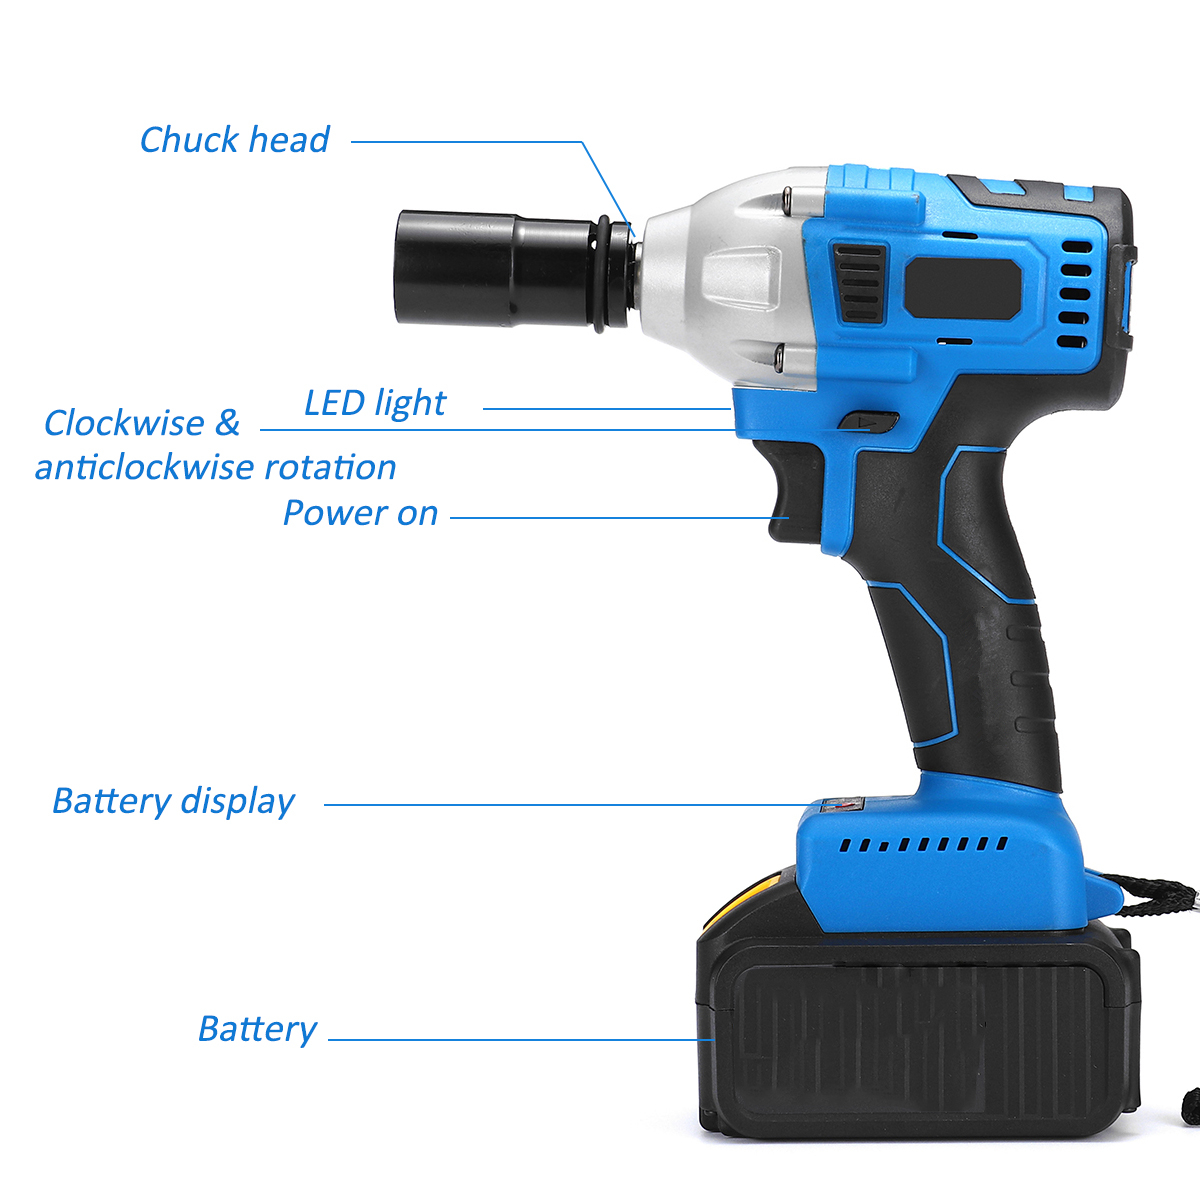 Electric-Screwdriver-Brushless-Cordless-Drill-Wireless-Electric-Wrench-Impact-Power-Tools-With-2-Bat-1380494-8